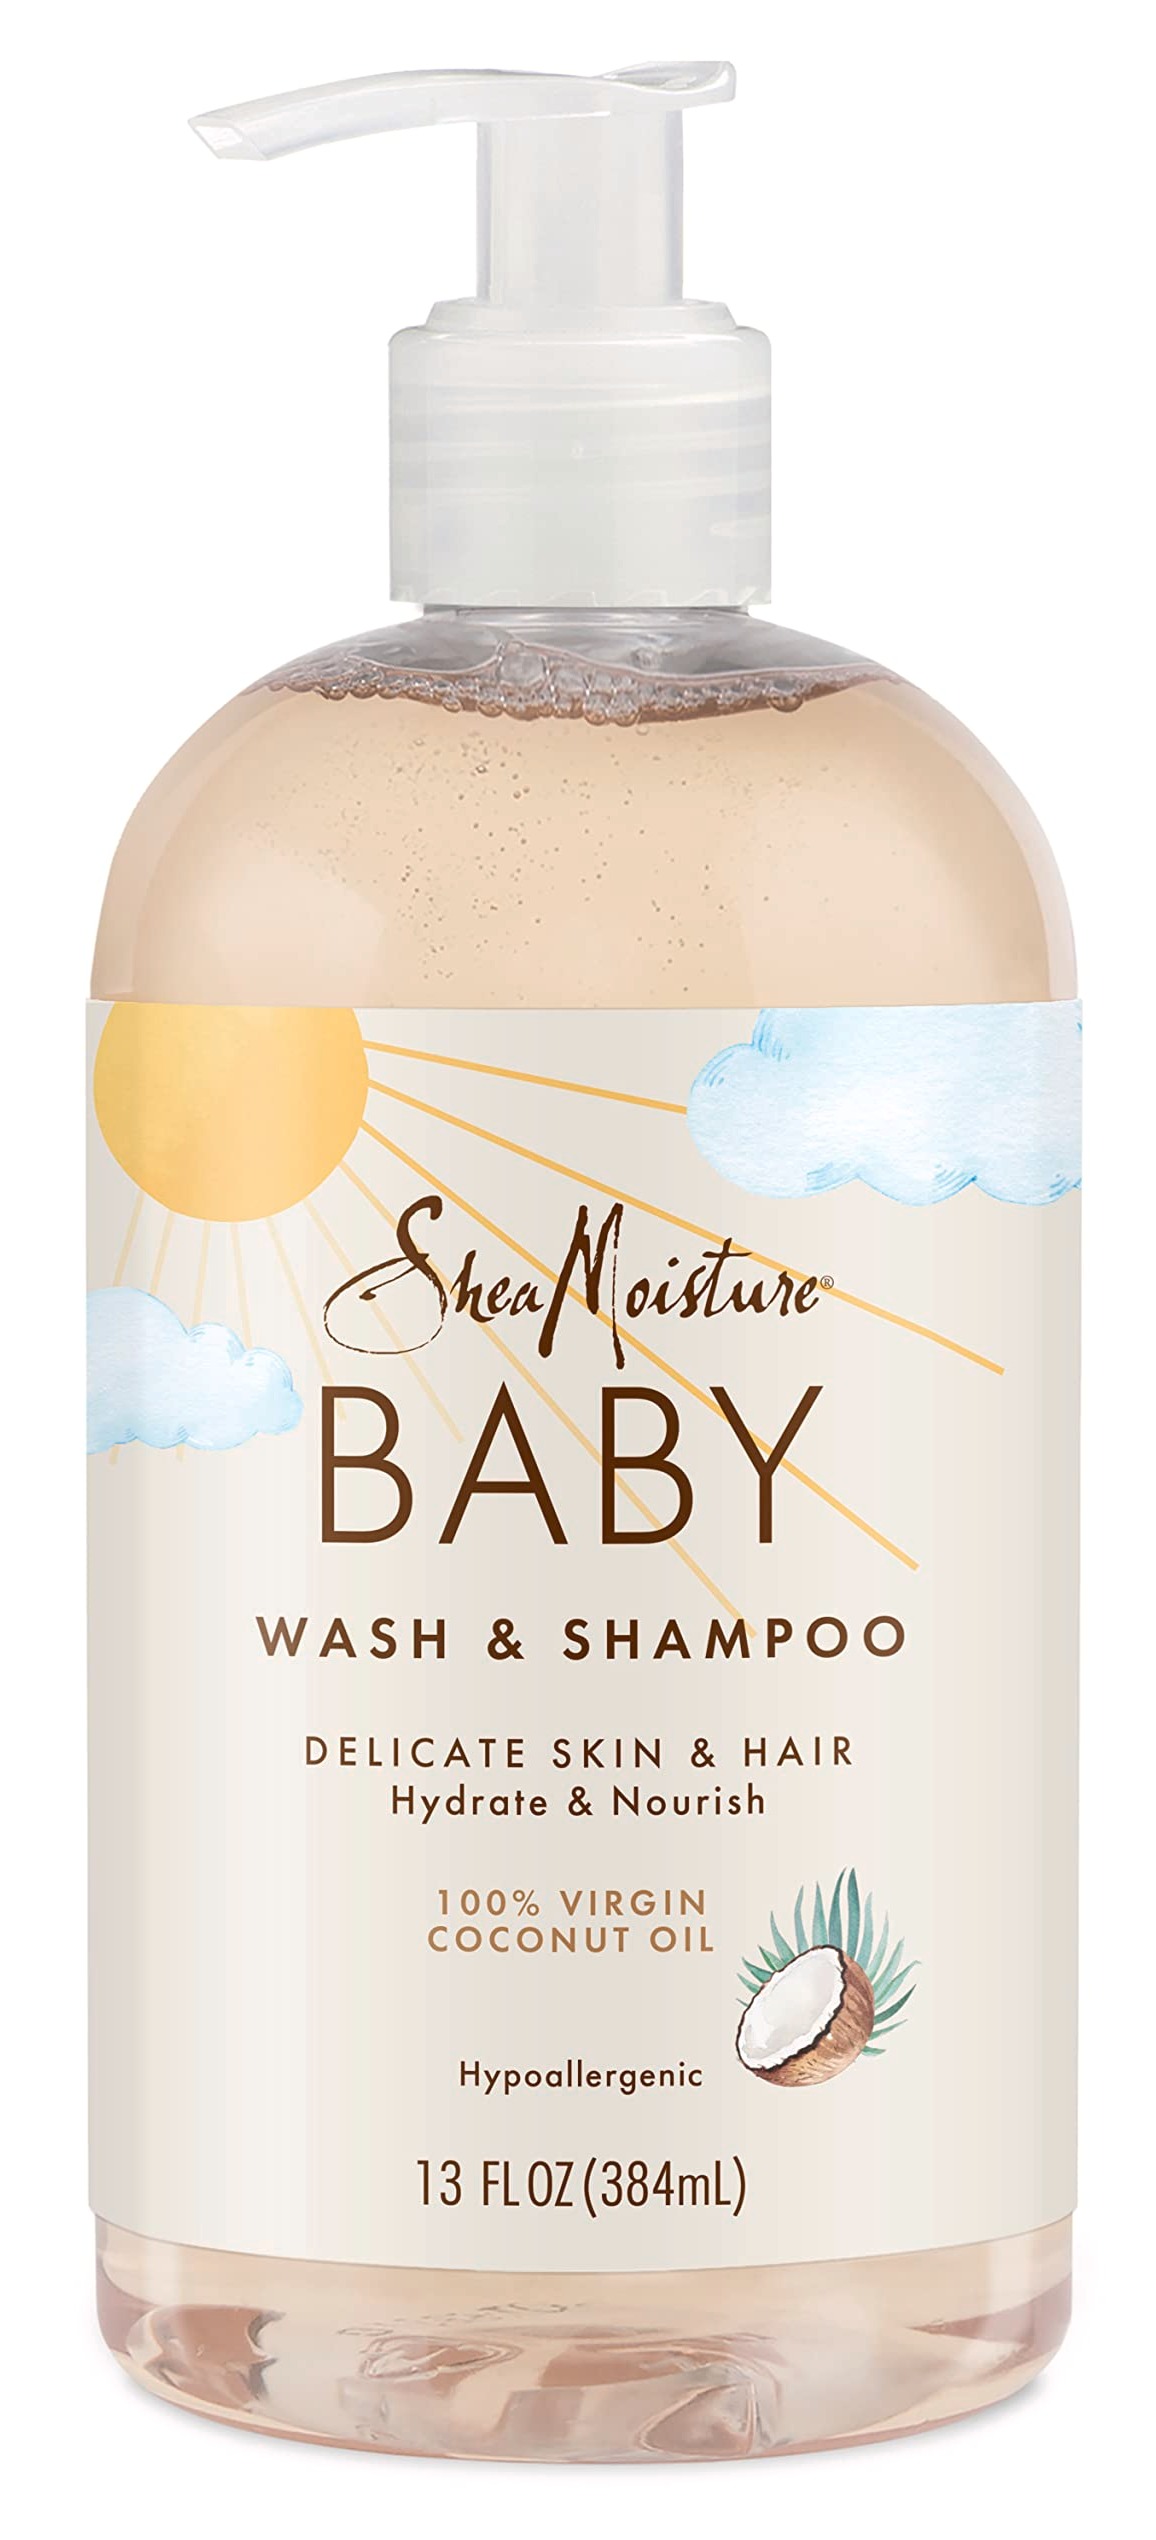 SheaMoisture Baby Wash and Shampoo 100% Virgin Coconut Oil for Baby Skin Cruelty Free Skin Care 13 oz [Subscribe & Save] $5.97